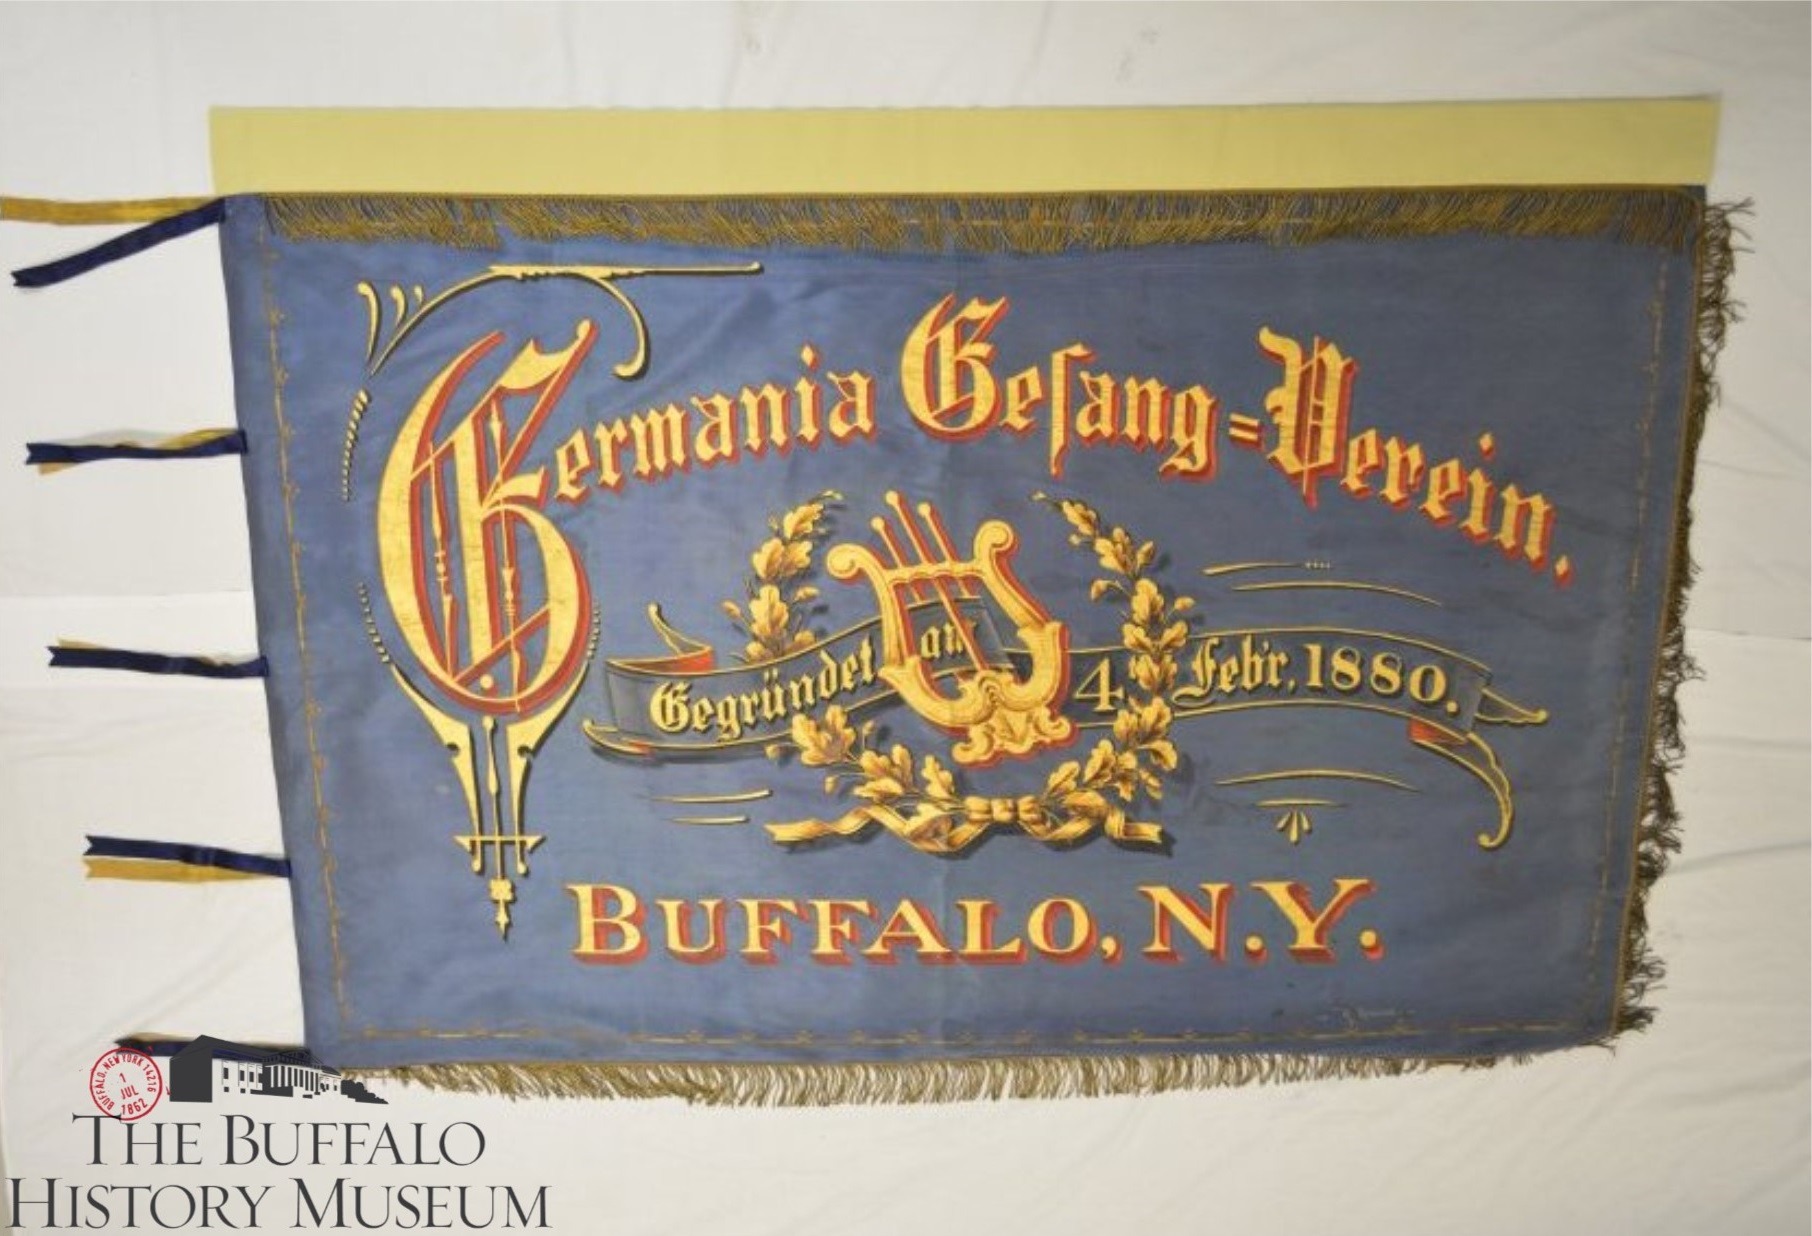 Artifact Collections - The Buffalo History Museum